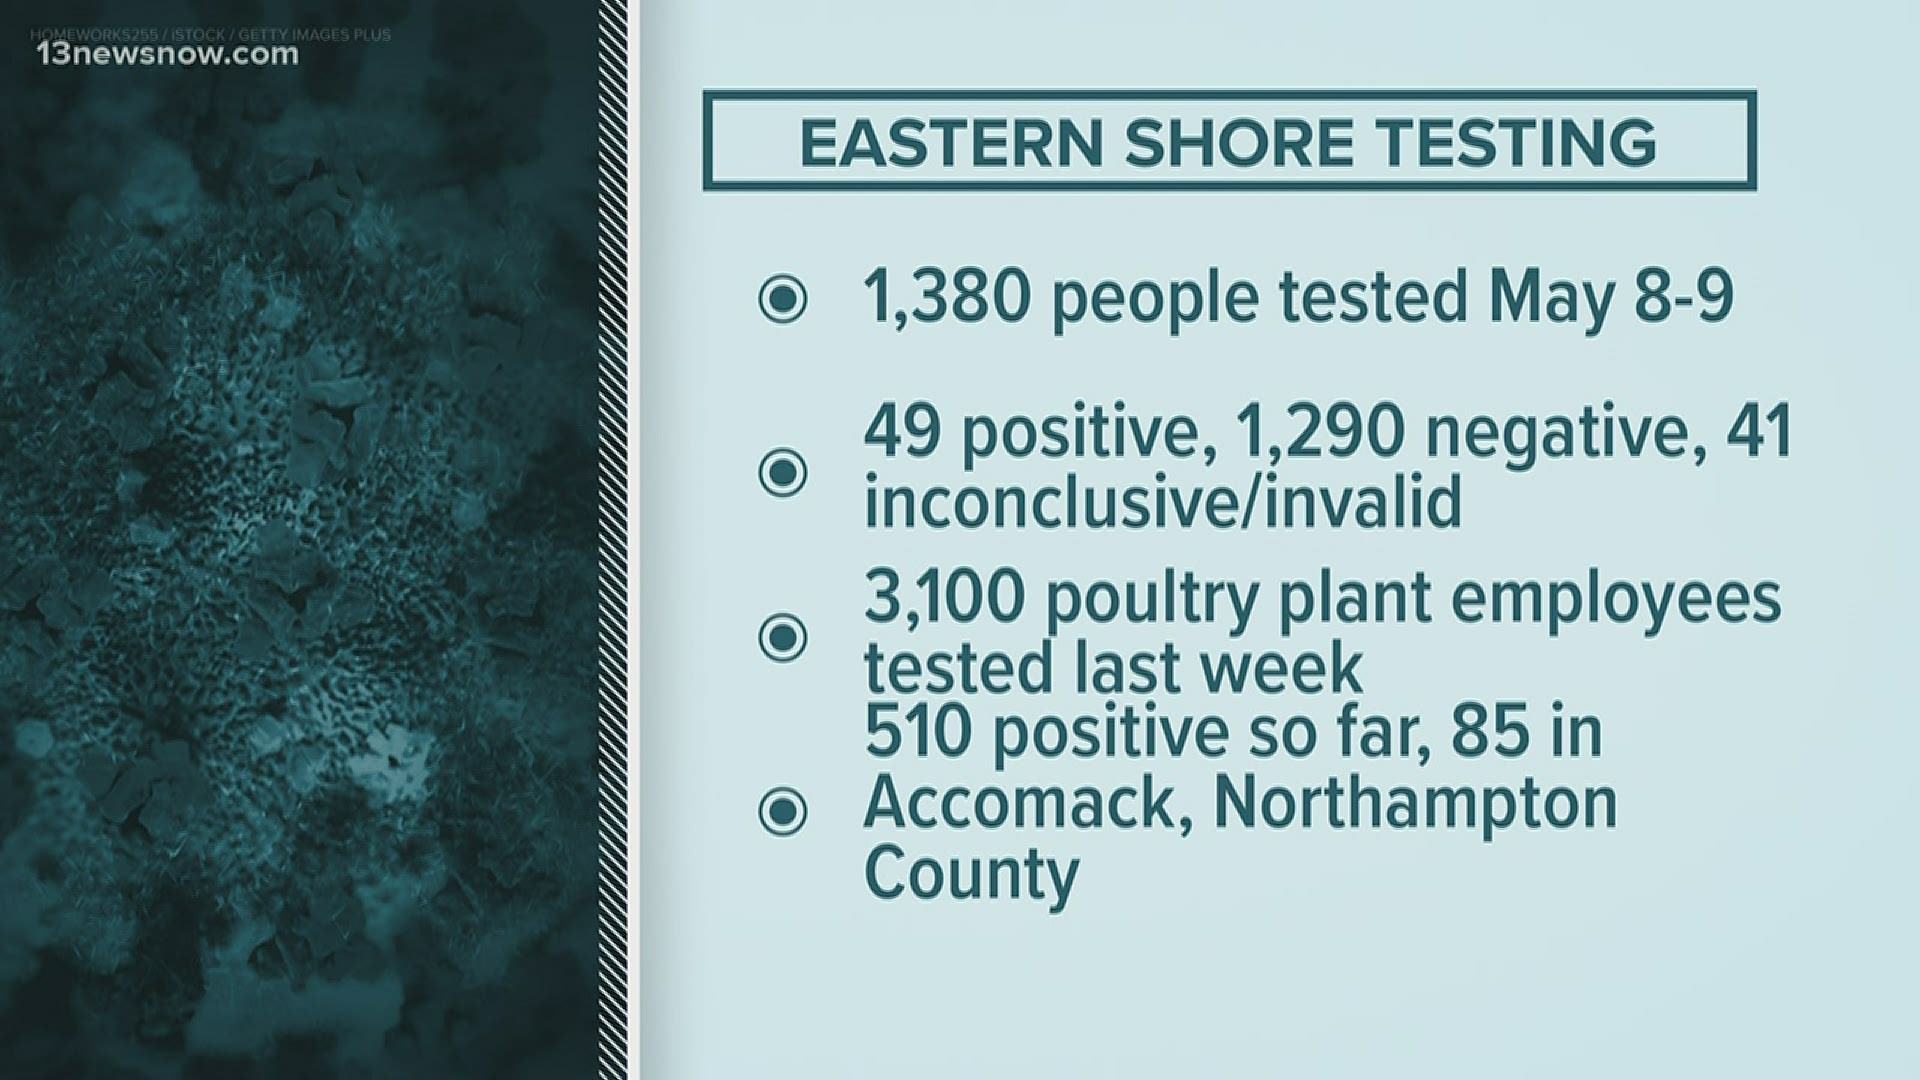 ESHD also reported results from about 3100 tests conducted at the poultry plants. That testing has revealed an approximate 18% positive rate, or 510 cases so far.